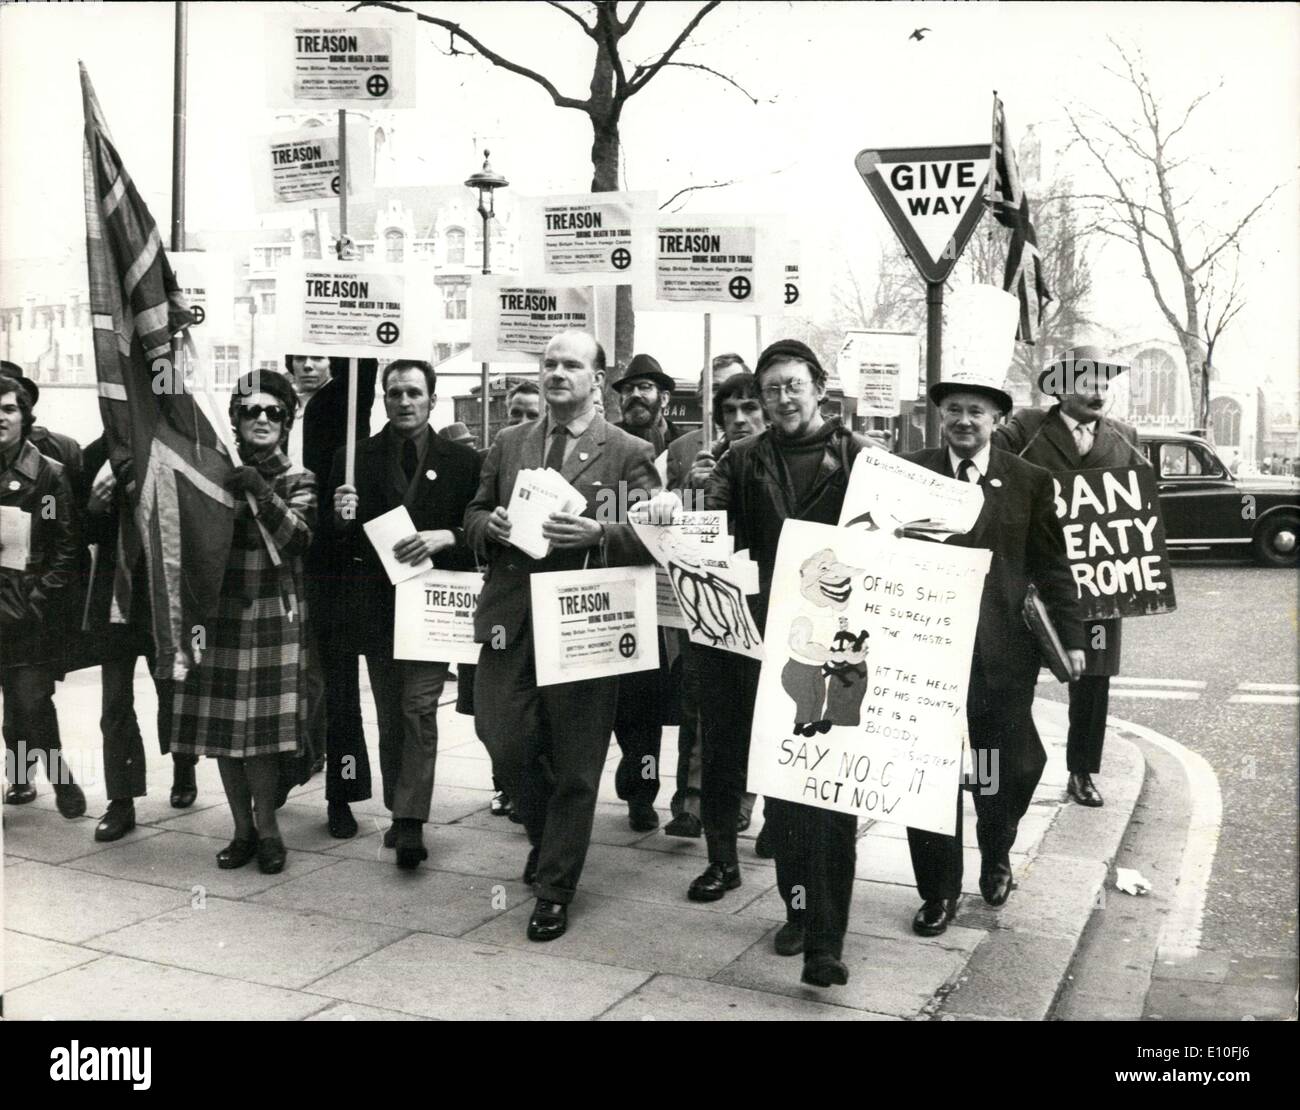 Dec. 30, 1972 - Anti-Common Market Resistance Rally Held At Central Hall Westminster: A rally at Westminster's Central Hall was Stock Photo